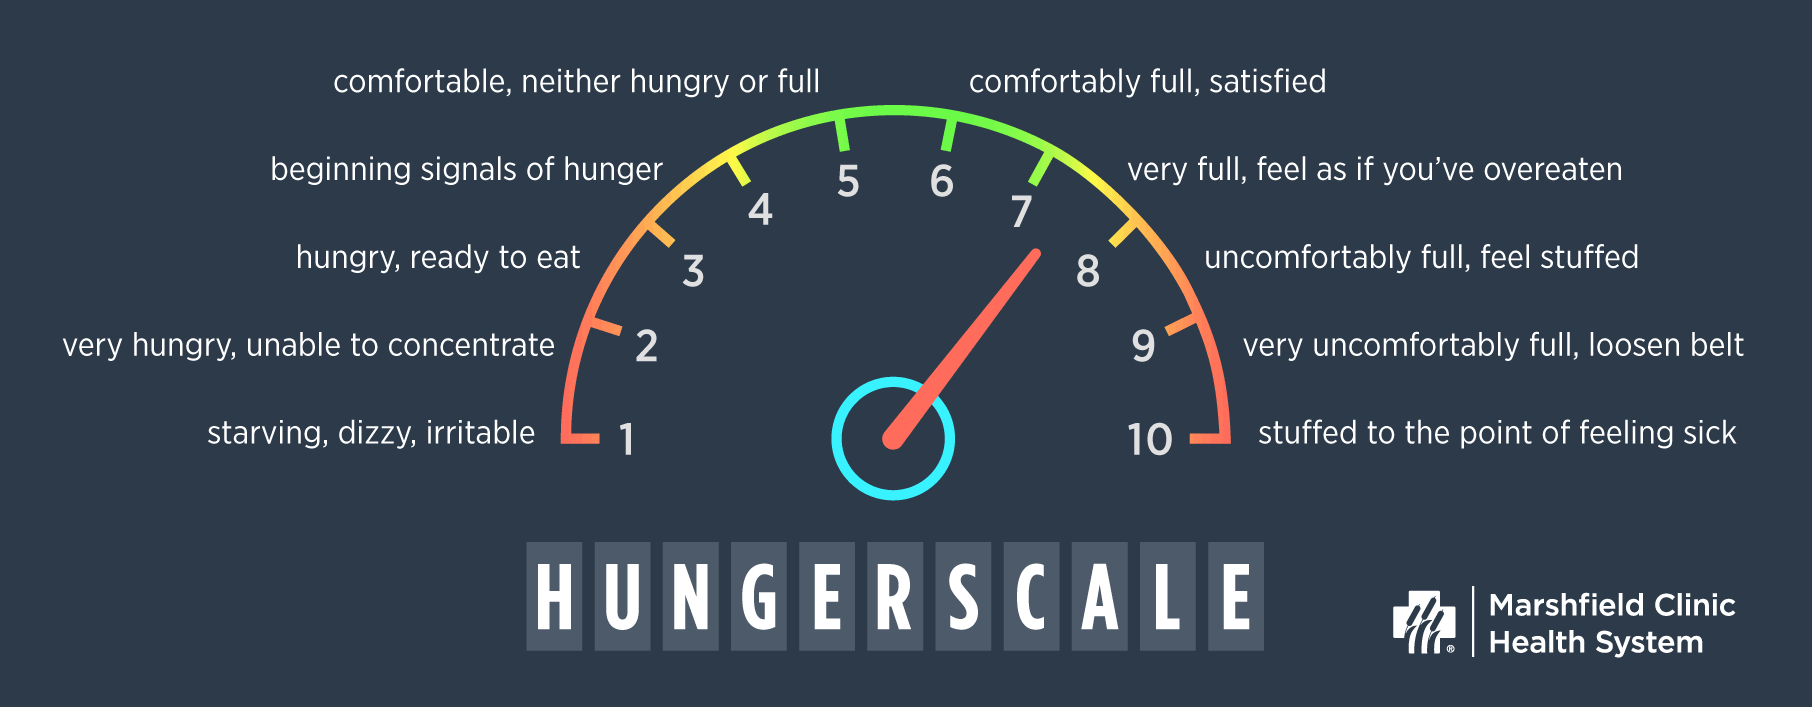 hunger scale updated